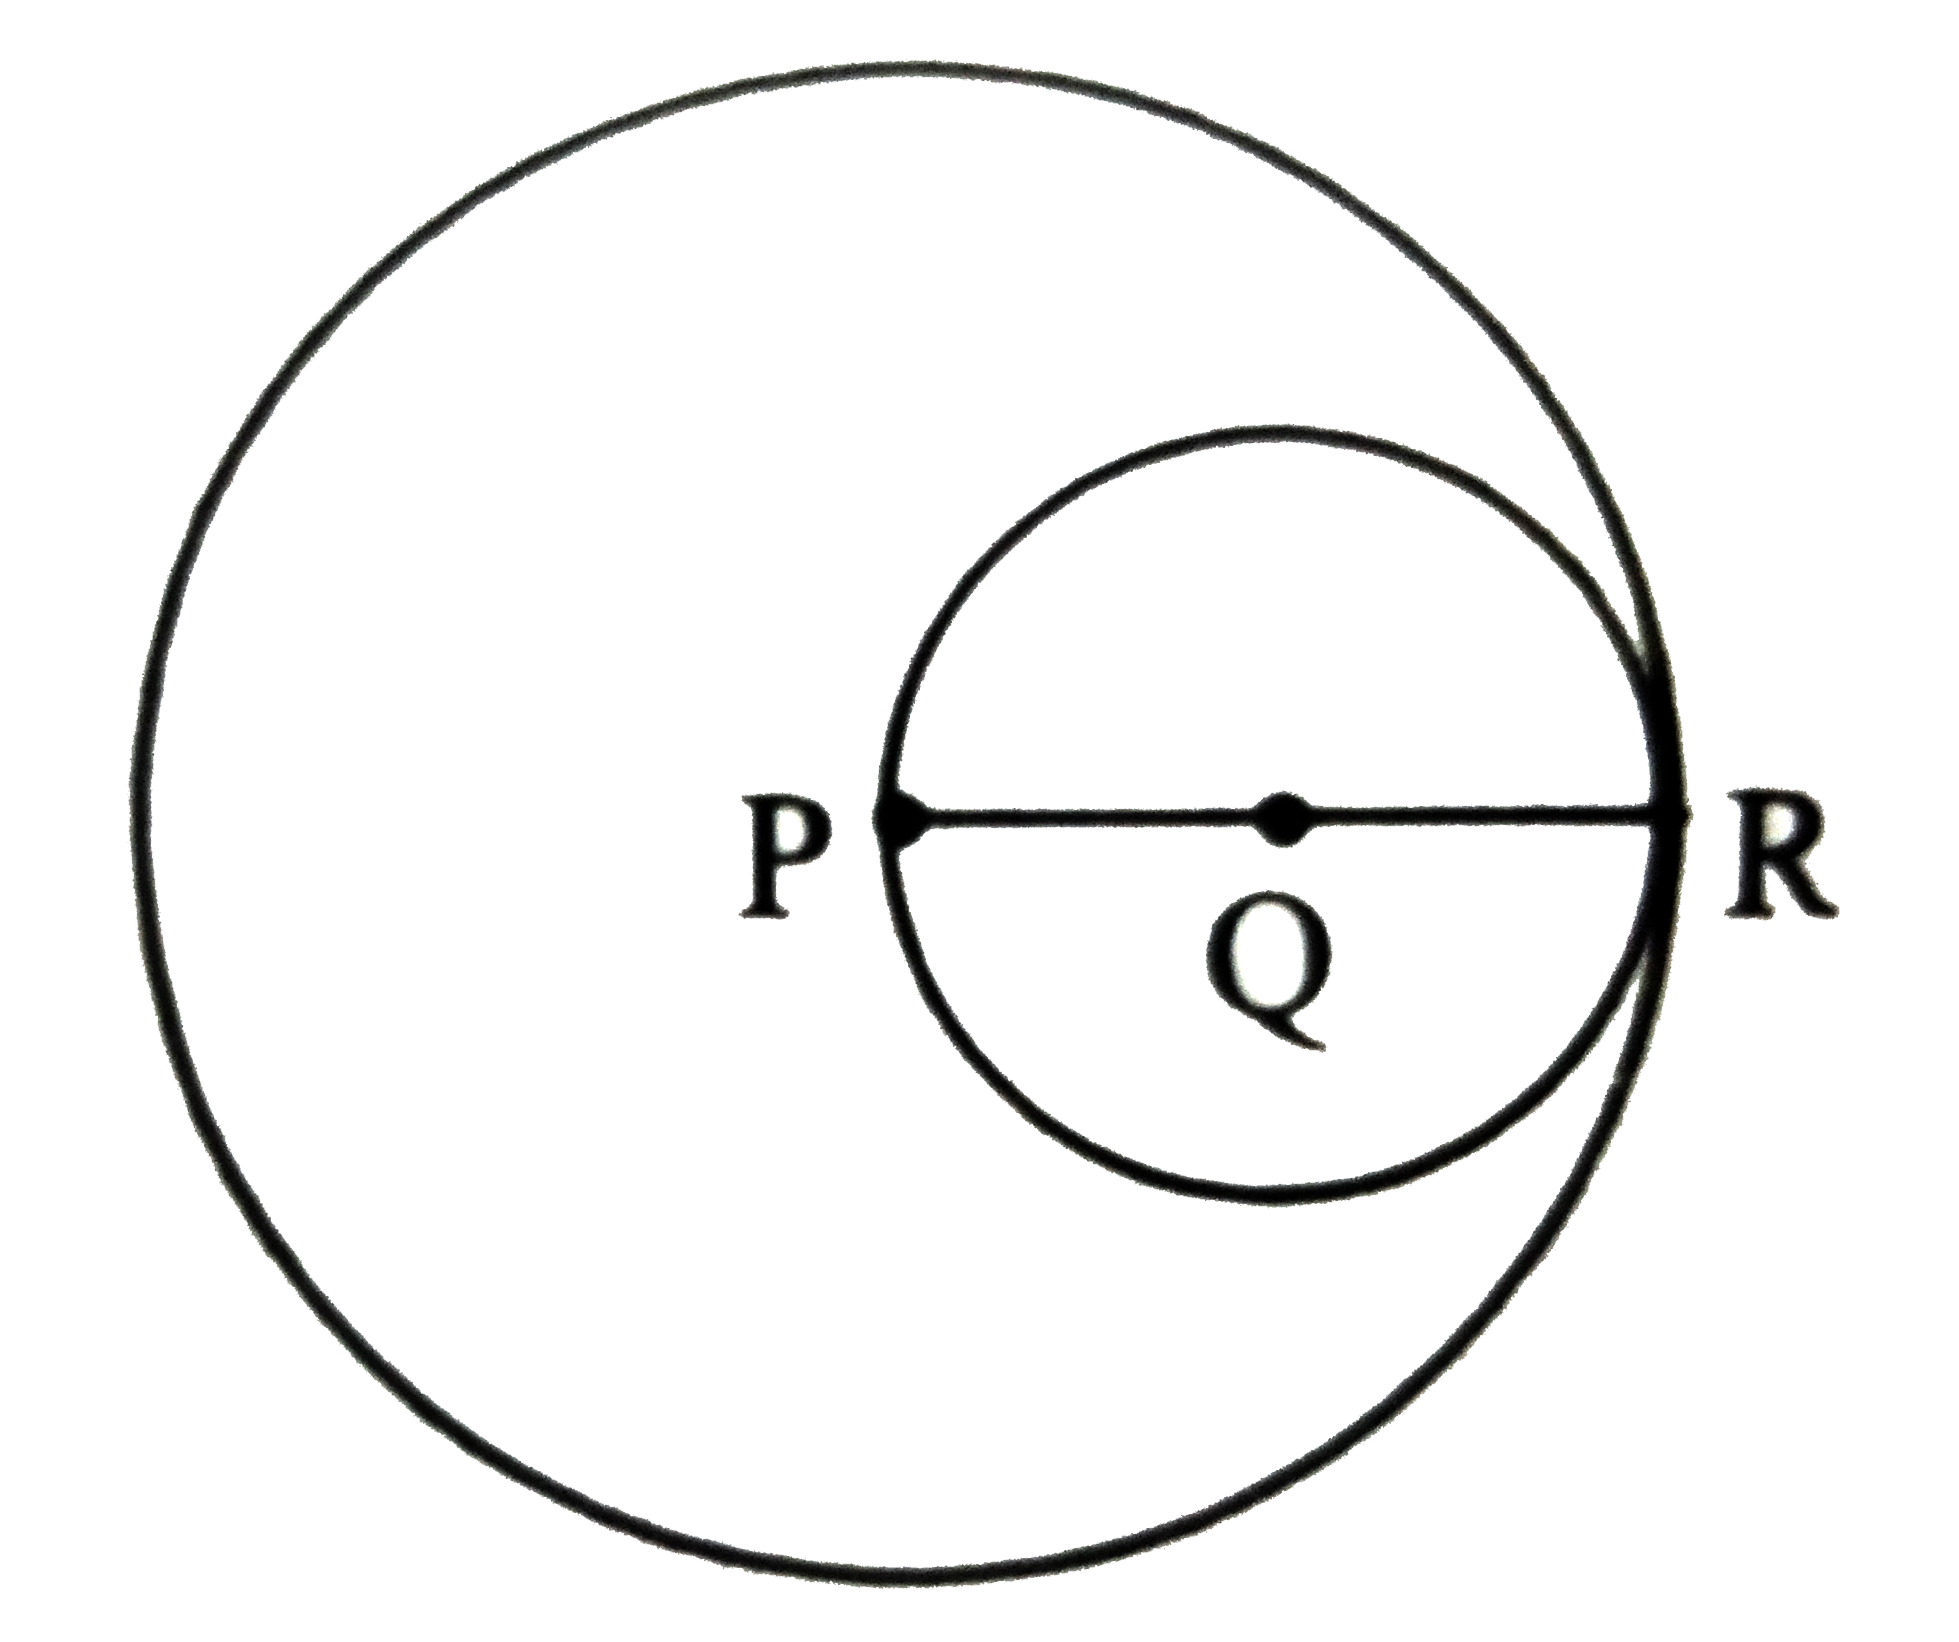 Two circles having radii 3.5cm and 4.8cm touch each other internally. Find the distance between their centres.